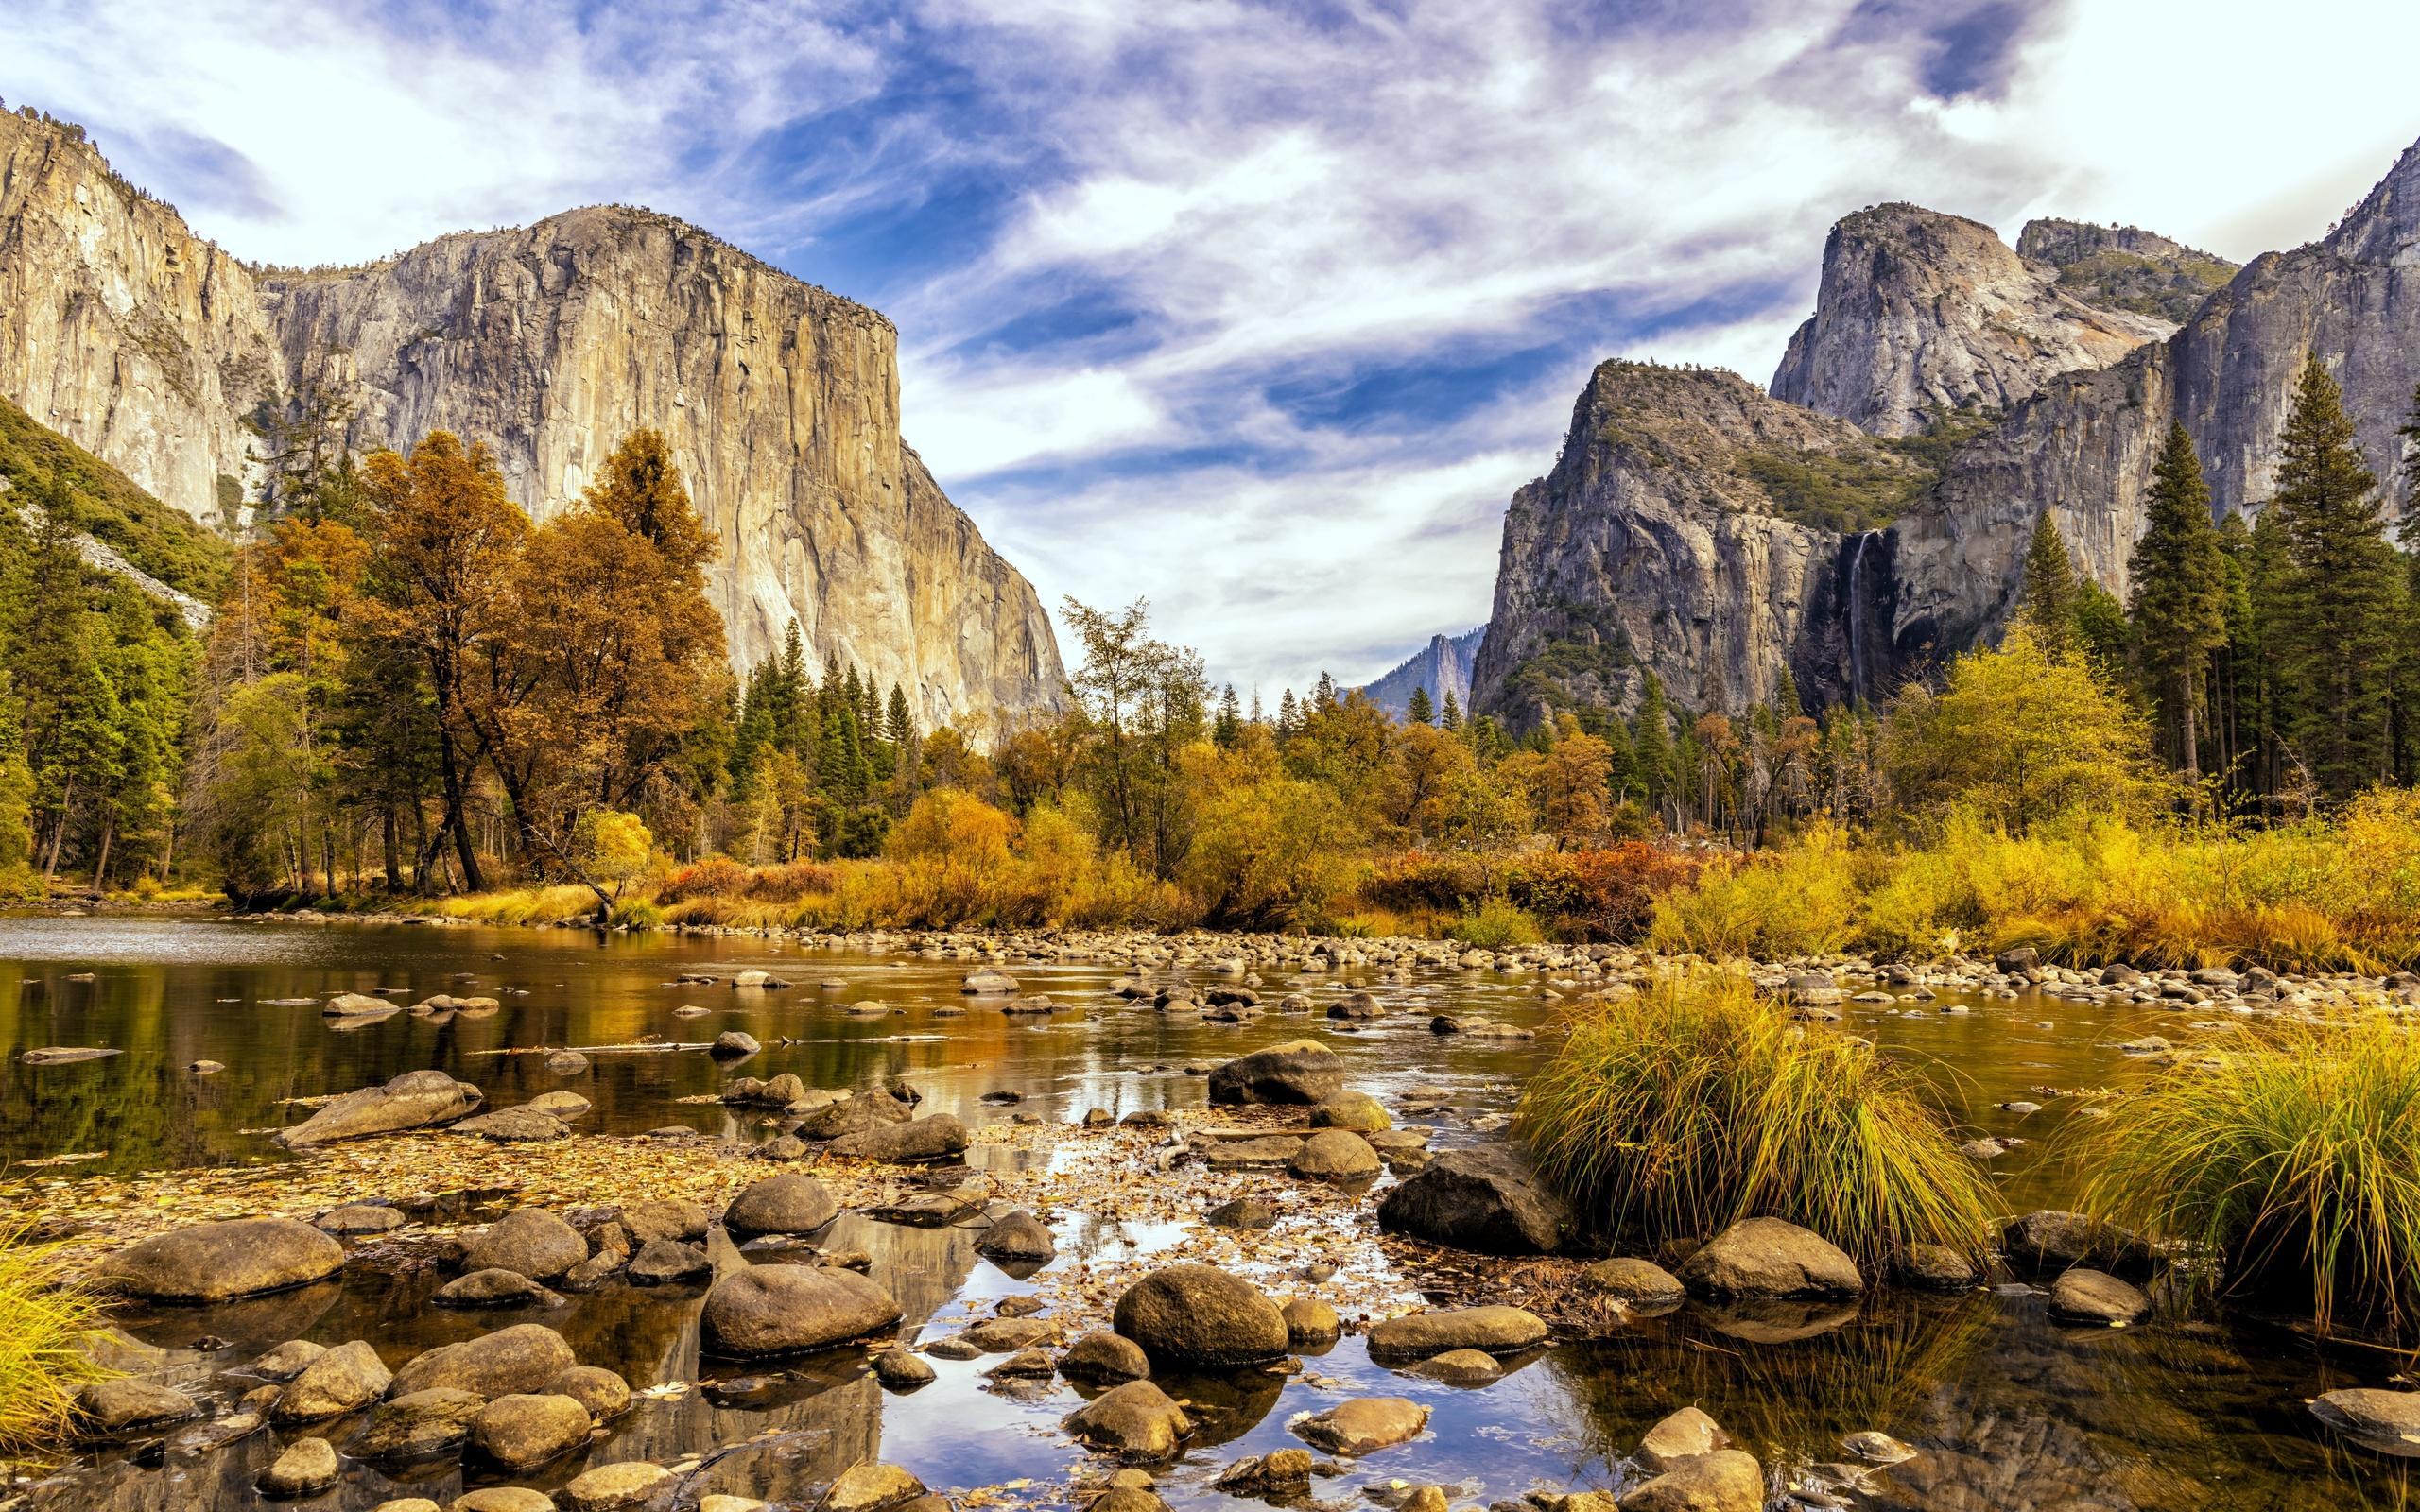 Download wallpaper USA, Yosemite Valley, Merced River, autumn, american landmarks, mountains, Yosemite National Park, Sierra Nevada, America for desktop with resolution 2560x1600. High Quality HD picture wallpaper